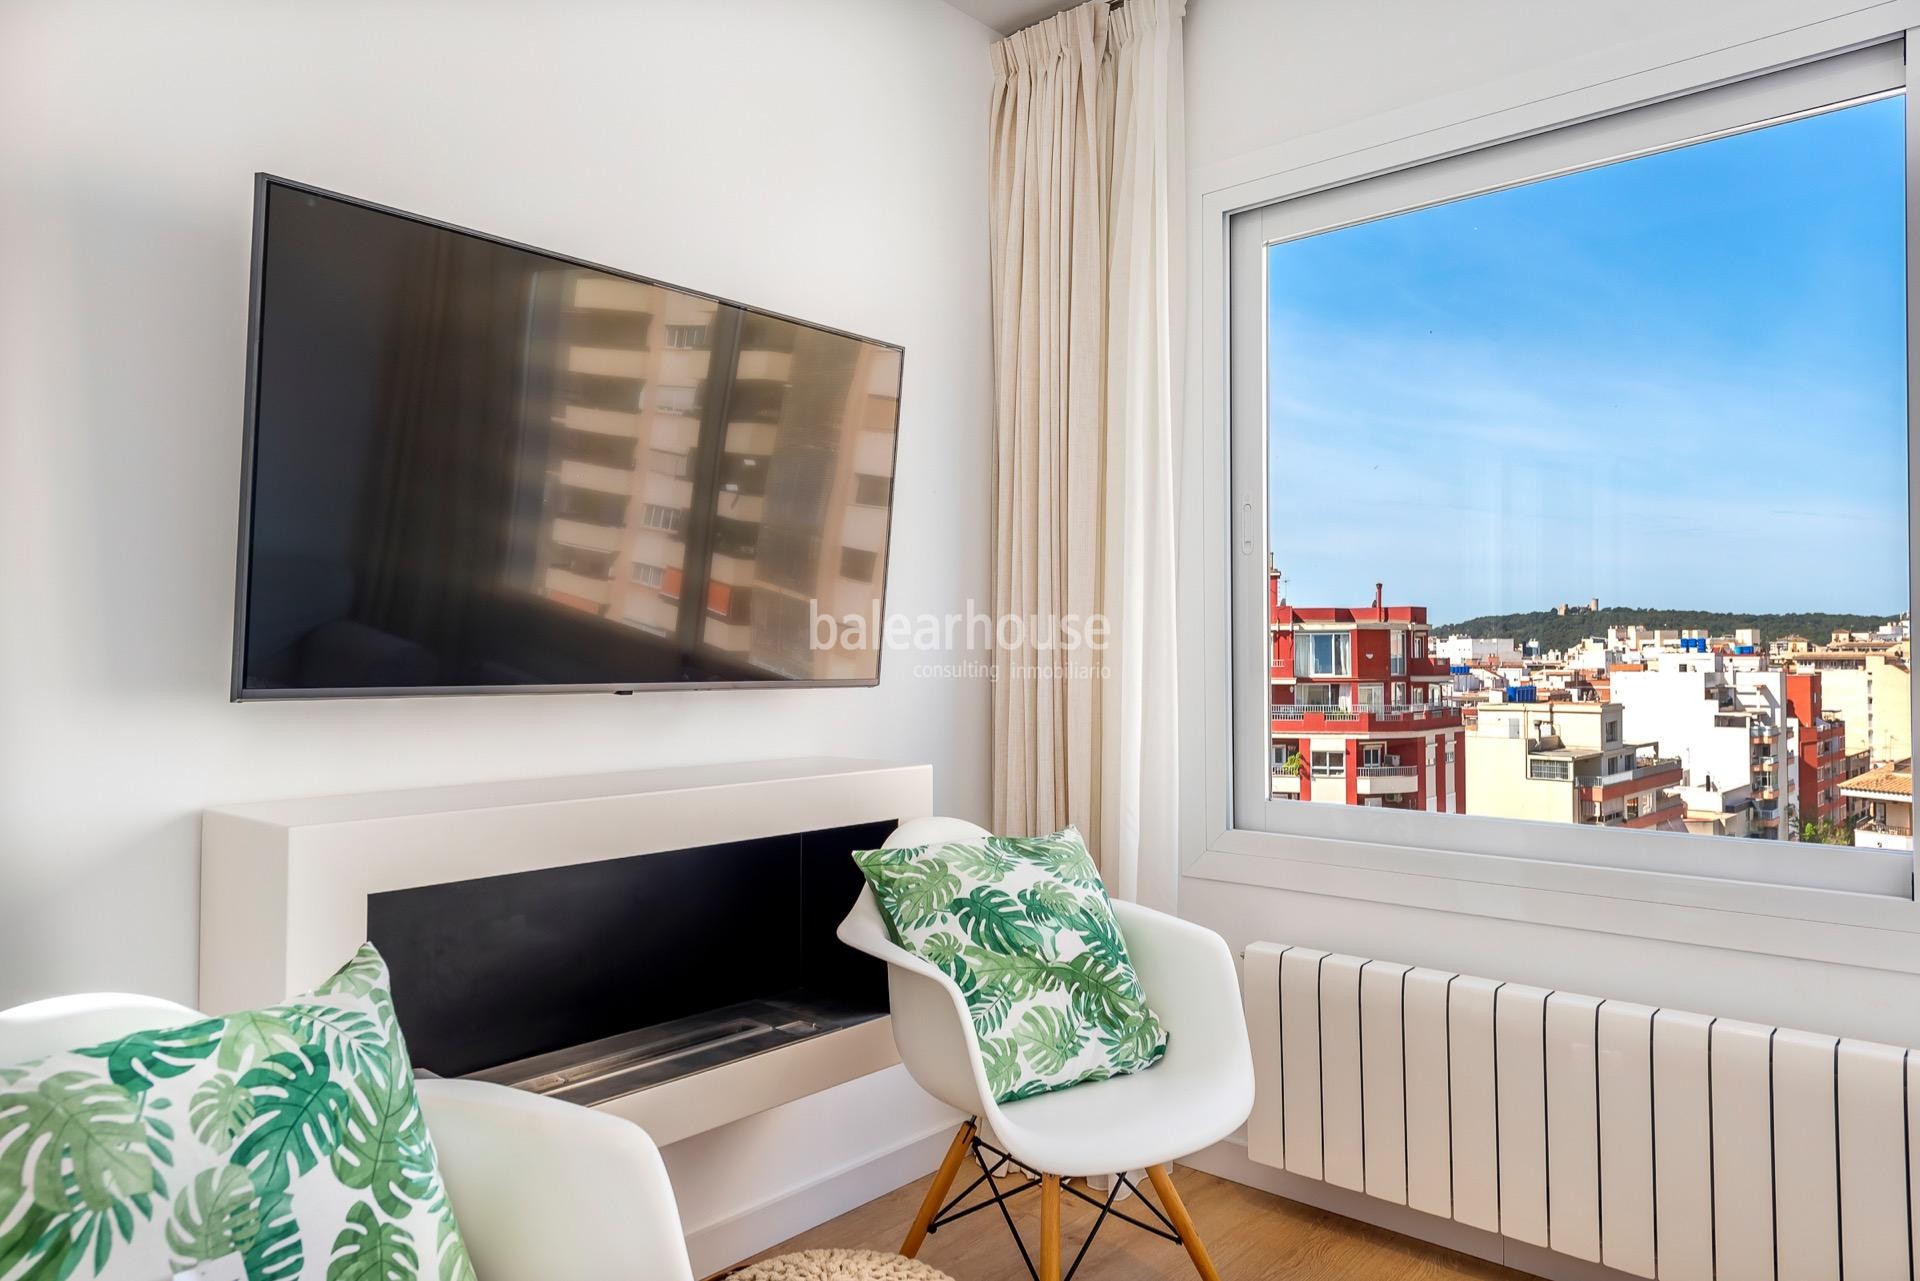 Bright renovated penthouse with beautiful modern design and large terrace in the center of Palma